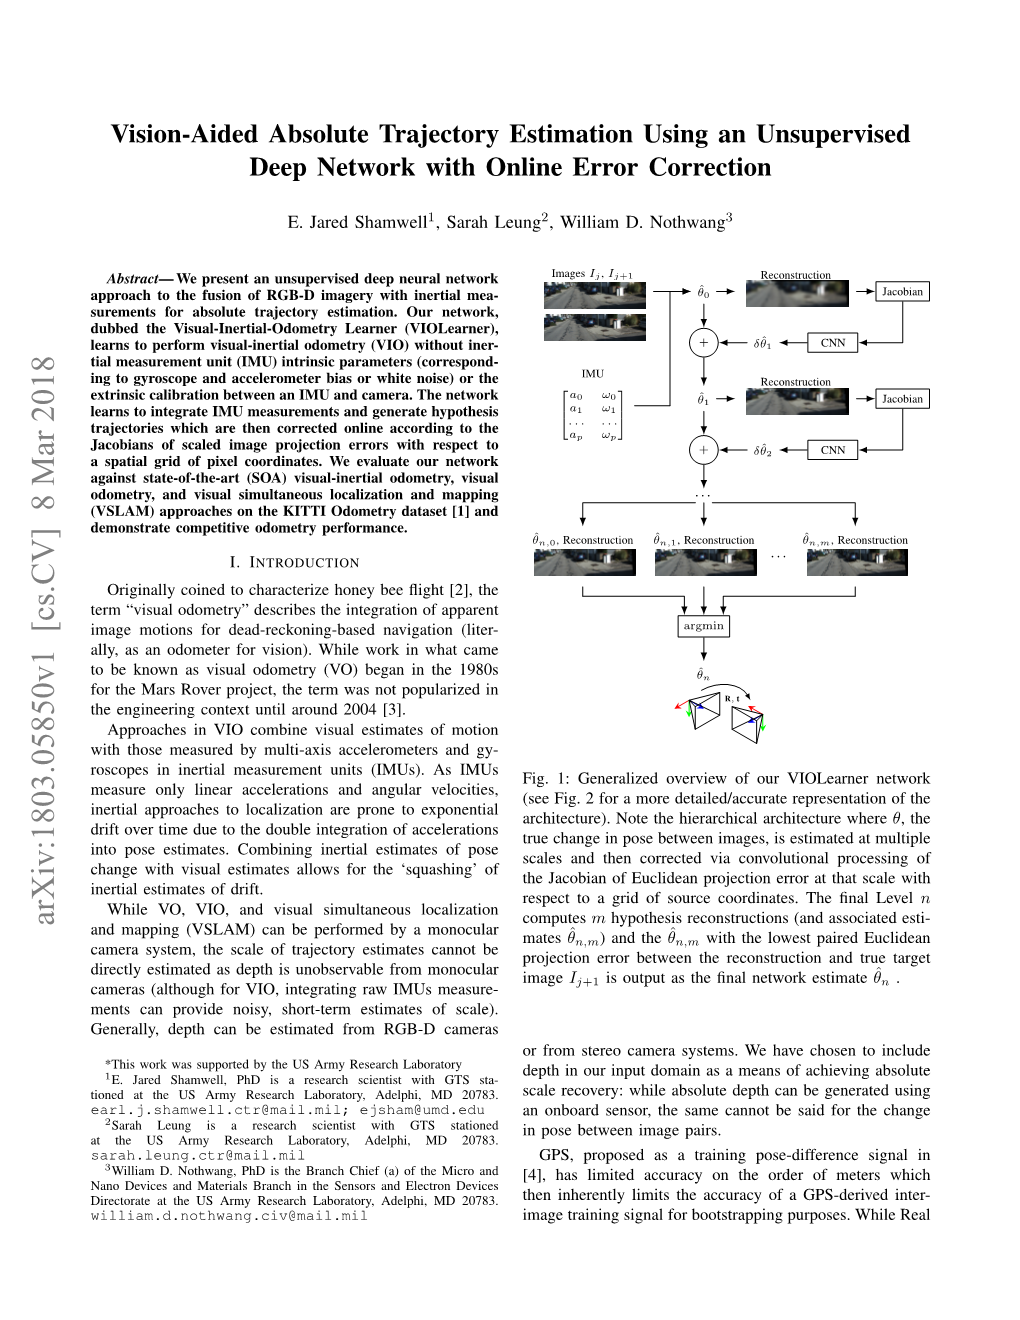 Vision-Aided Absolute Trajectory Estimation Using an Unsupervised Deep Network with Online Error Correction